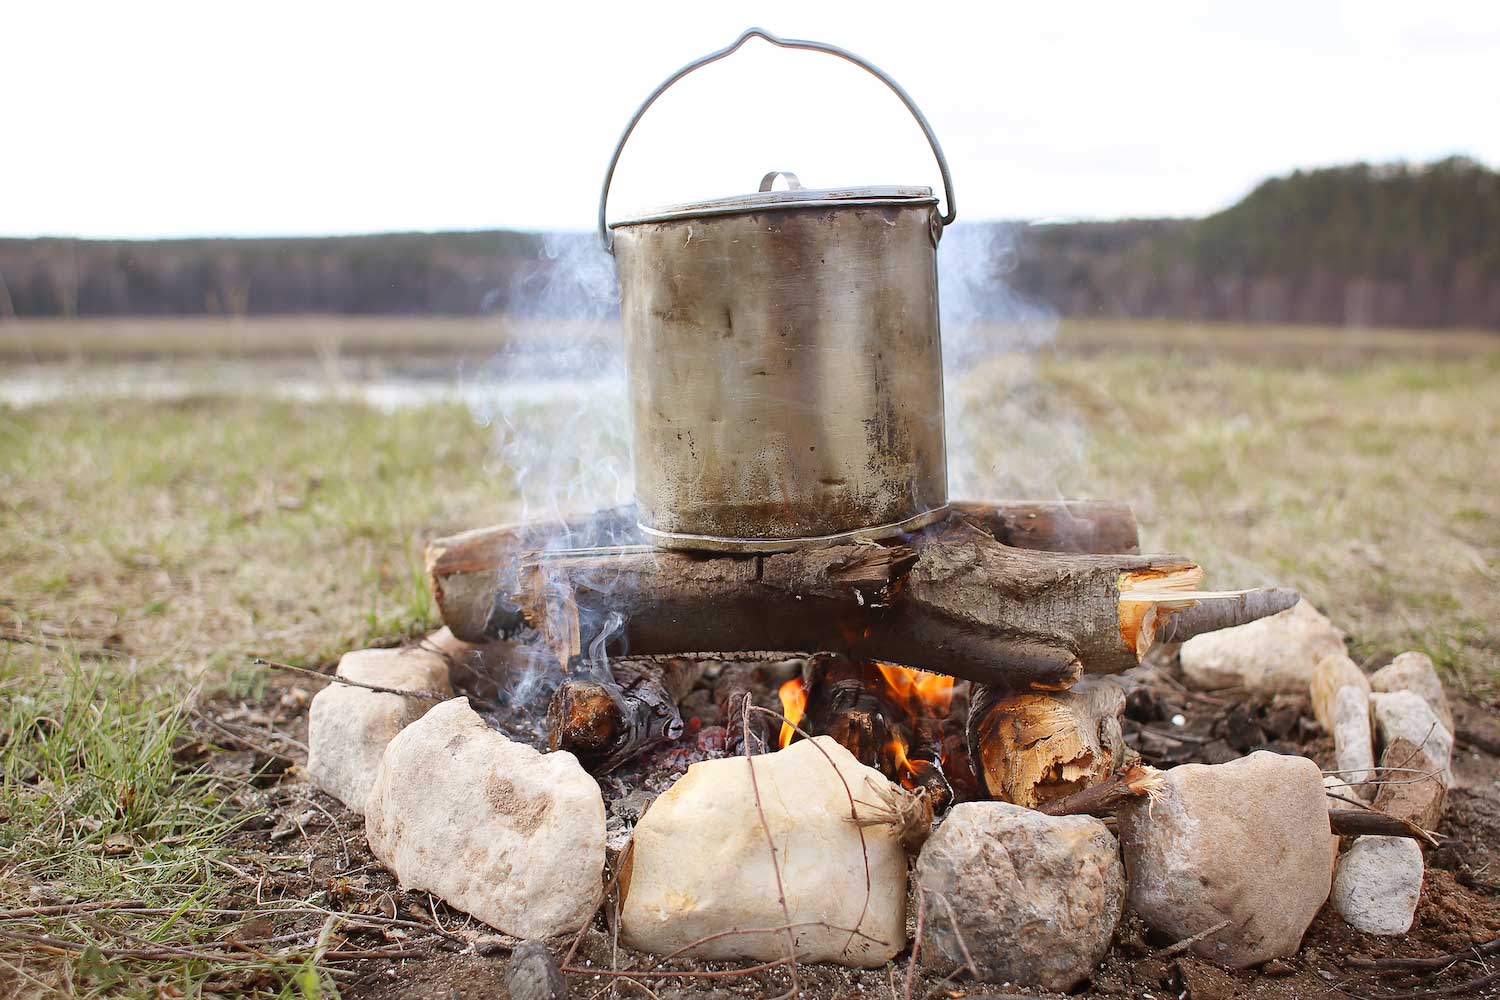 A large pot cooking over an open fire.